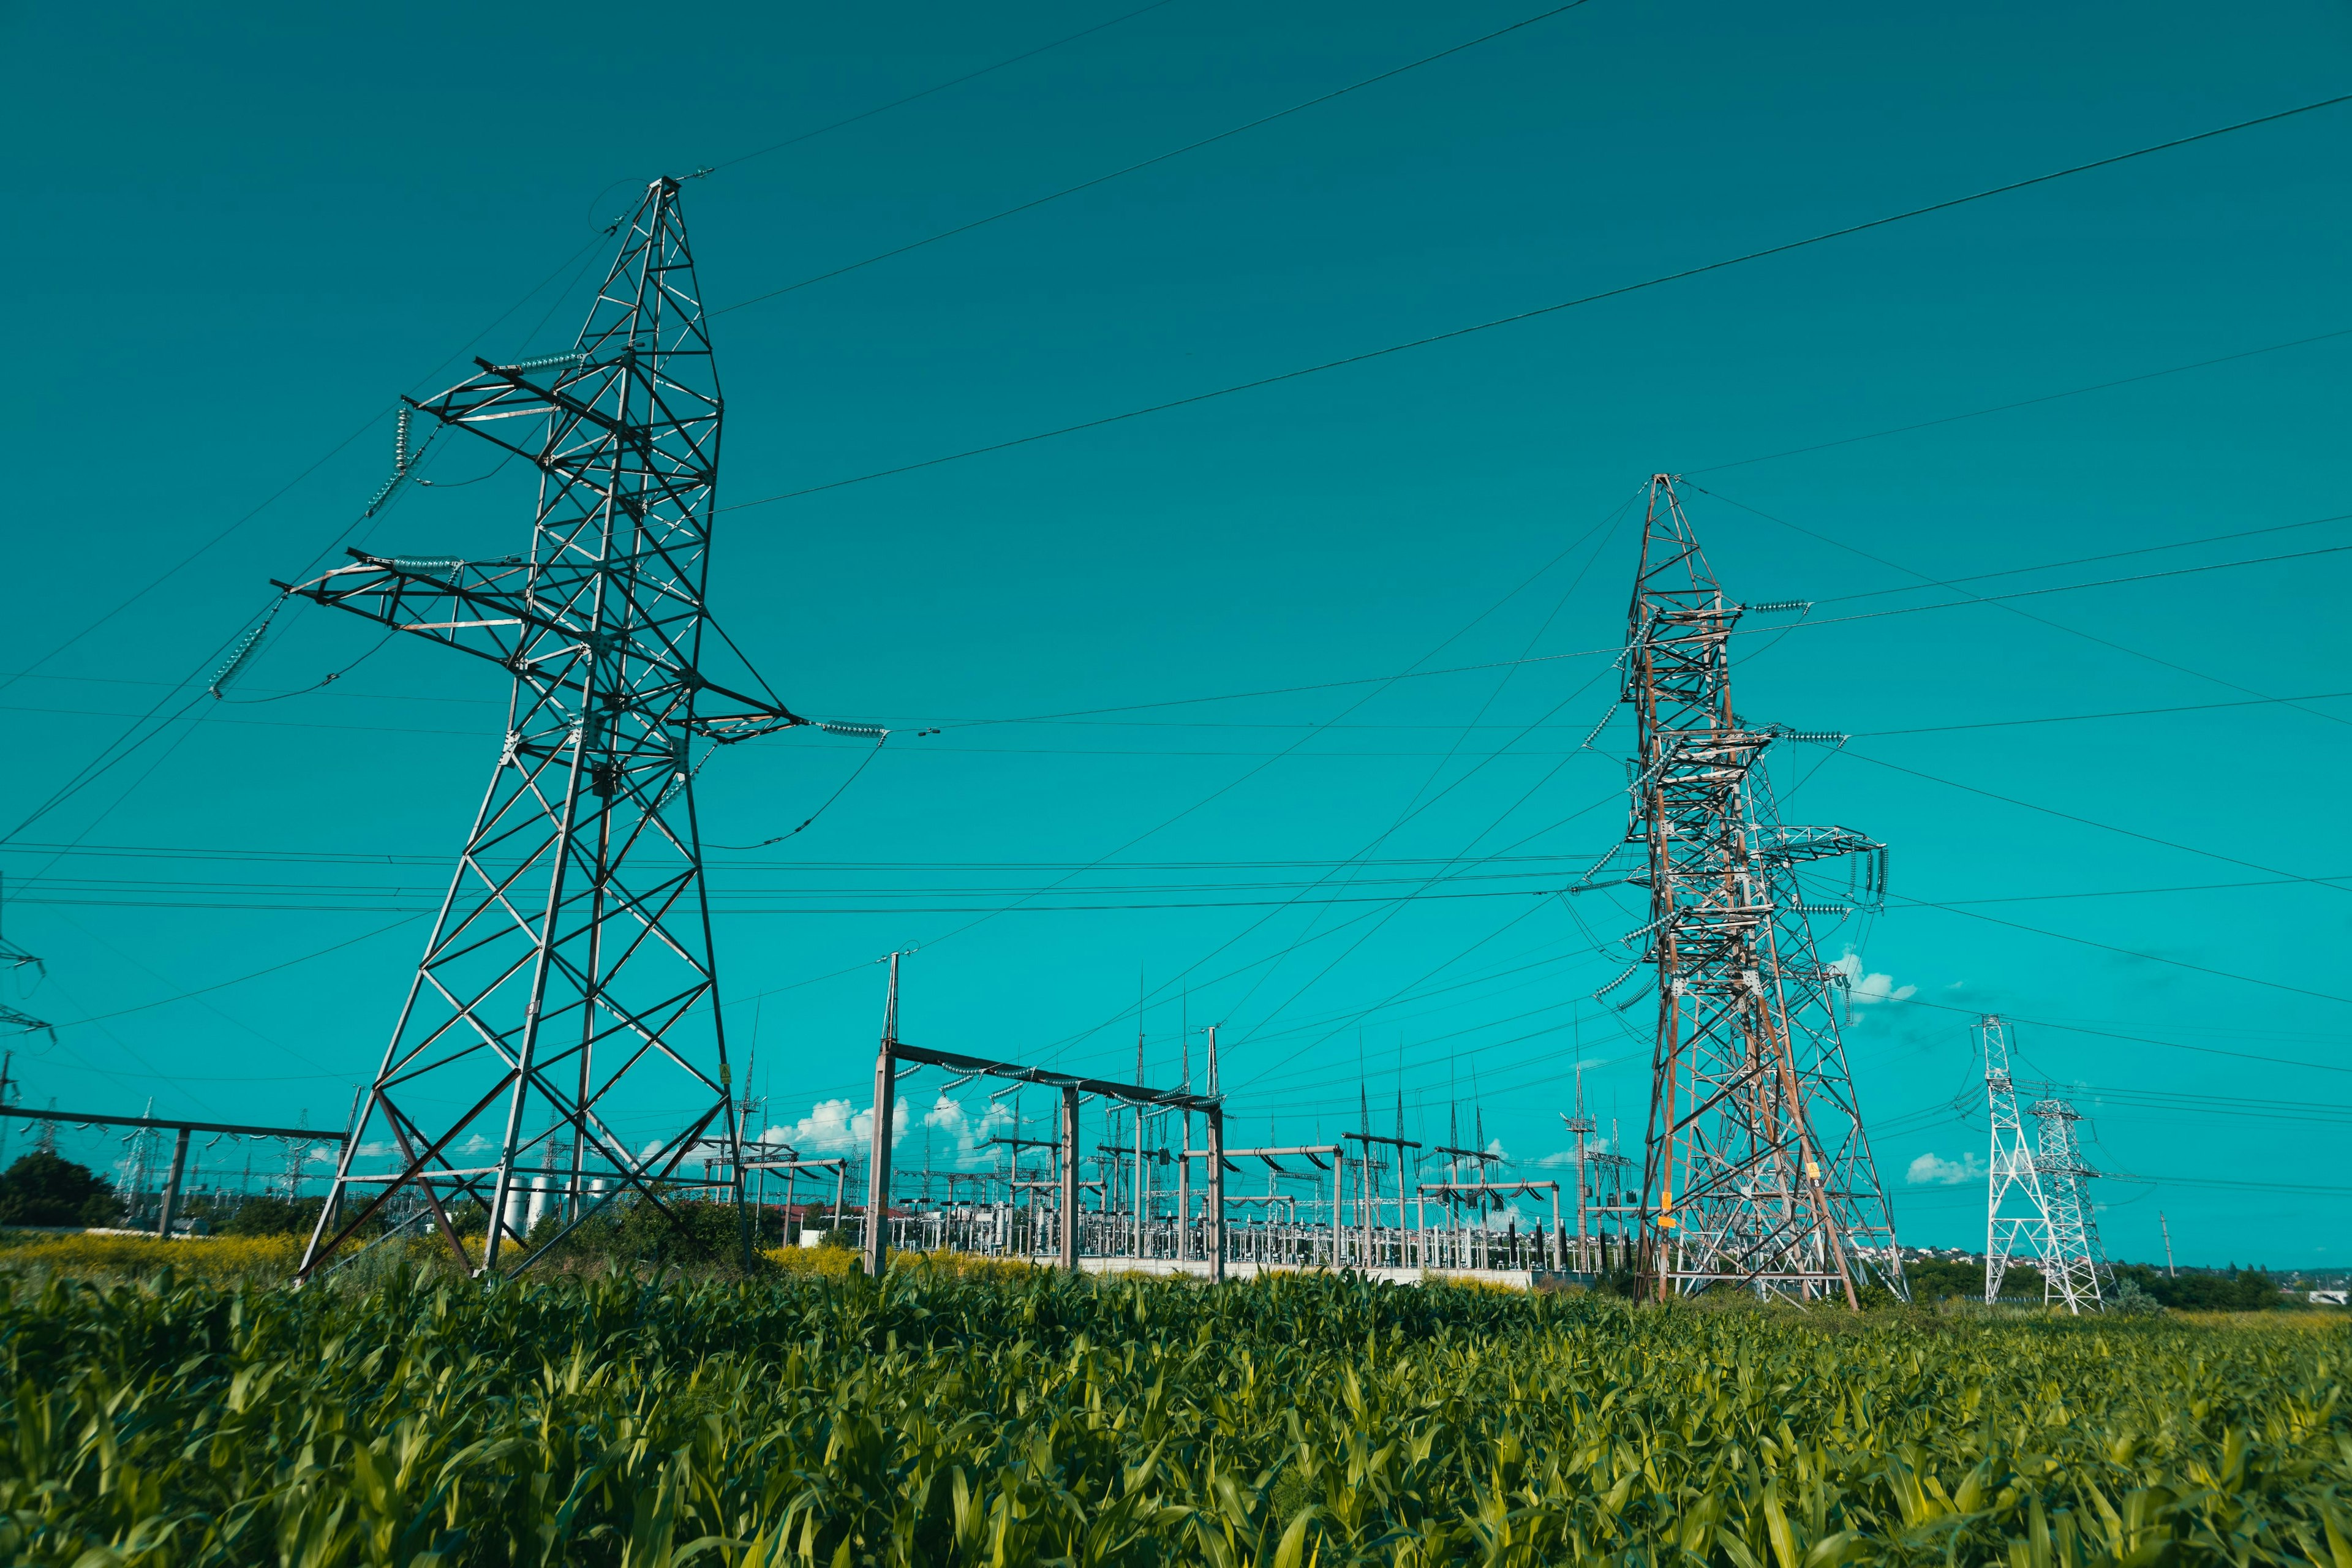 Image of transmission towers